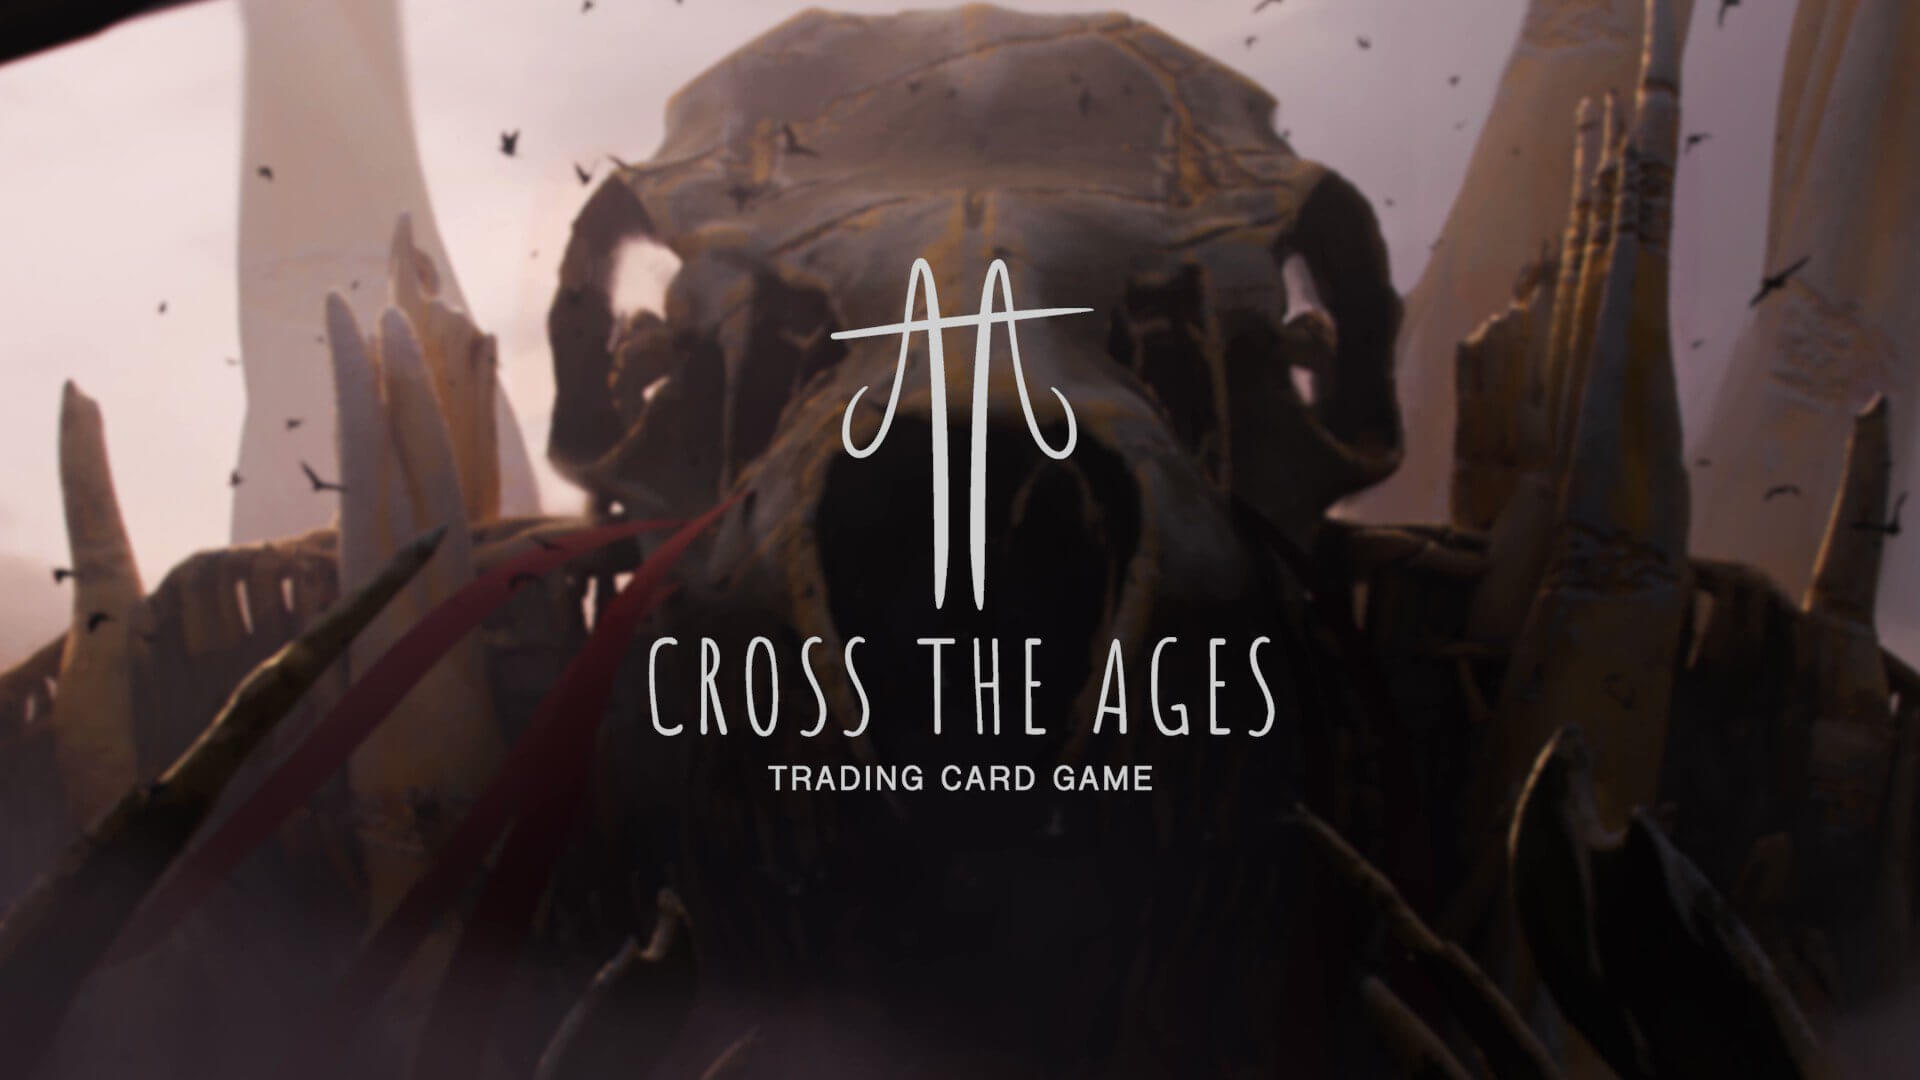 Cross the Ages Trading Card Game Details